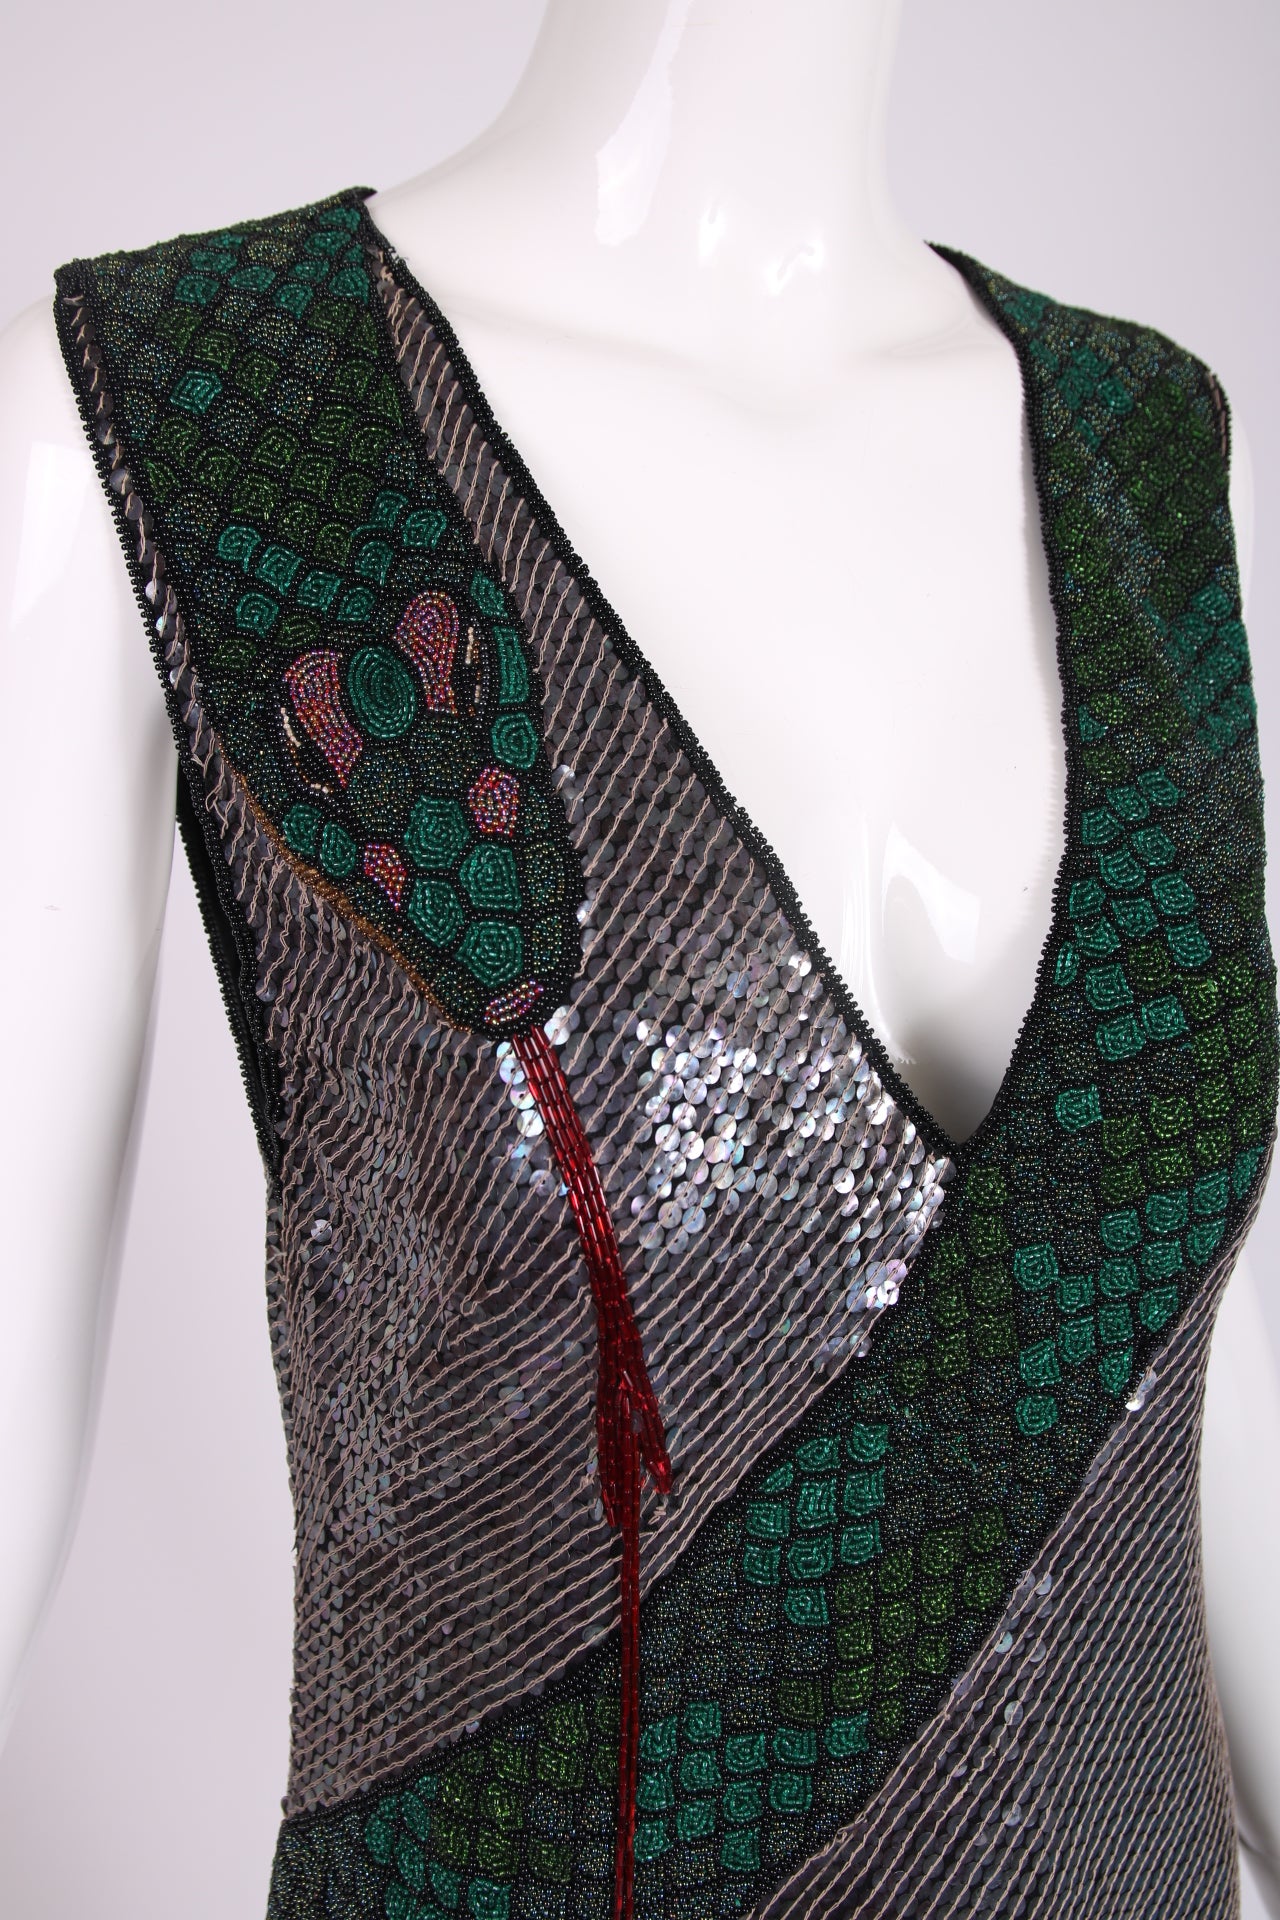 Rare vintage Krizia beaded and sequined snake motif mini dress featuring a wraparound snake with a red beaded tongue that hangs off the dress at the front. In excellent condition with some very minor bead and sequin loss. See